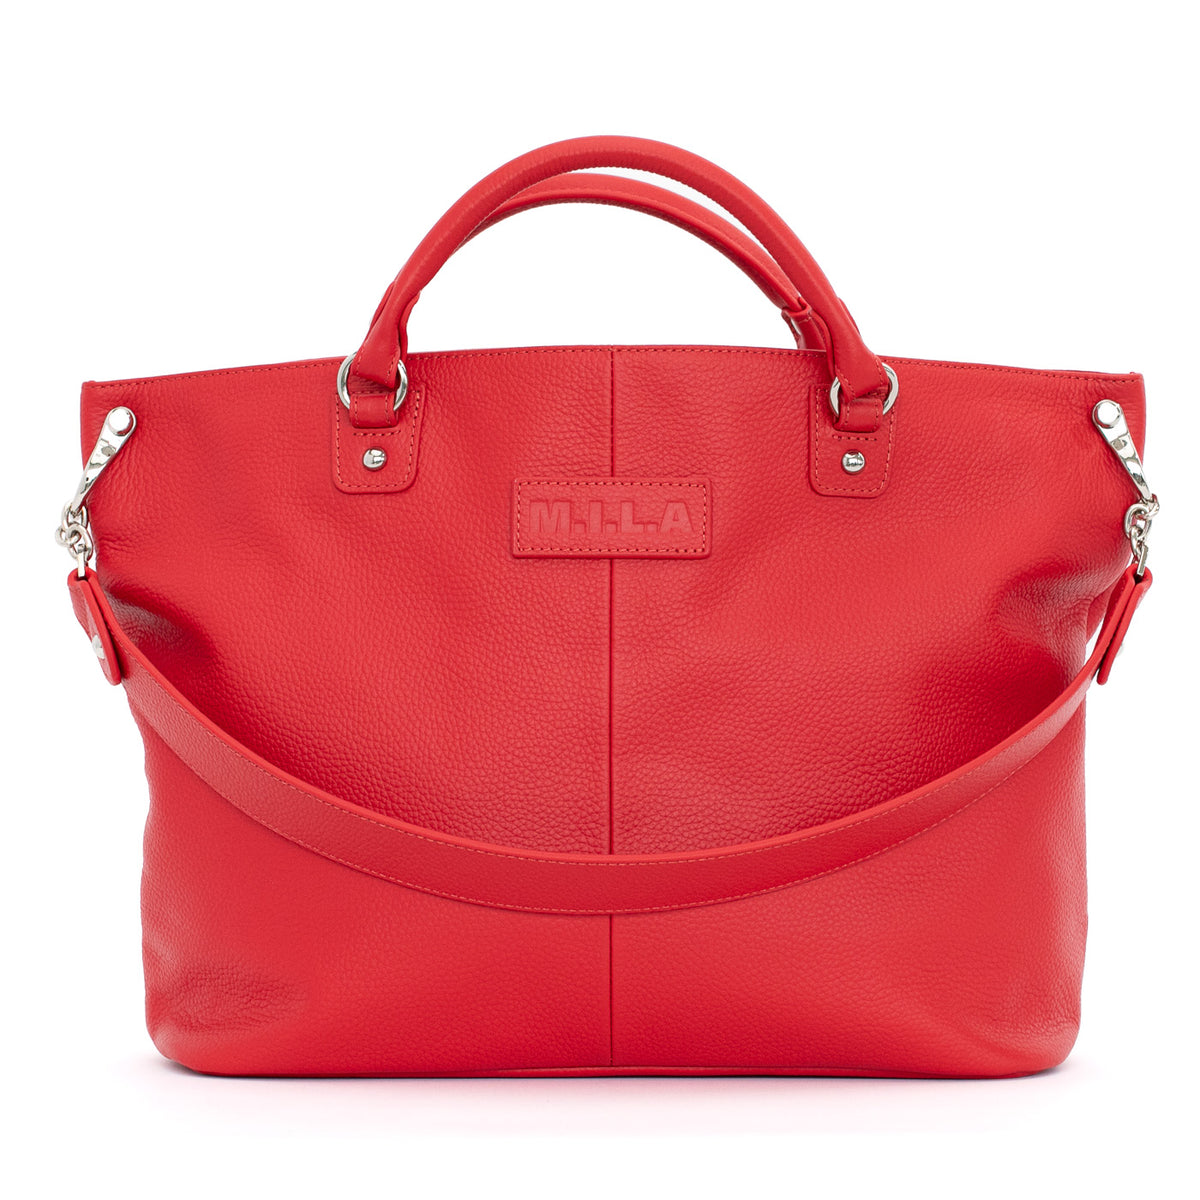 Darcy Bag | Red – M.I.L.A. made in Los Angeles